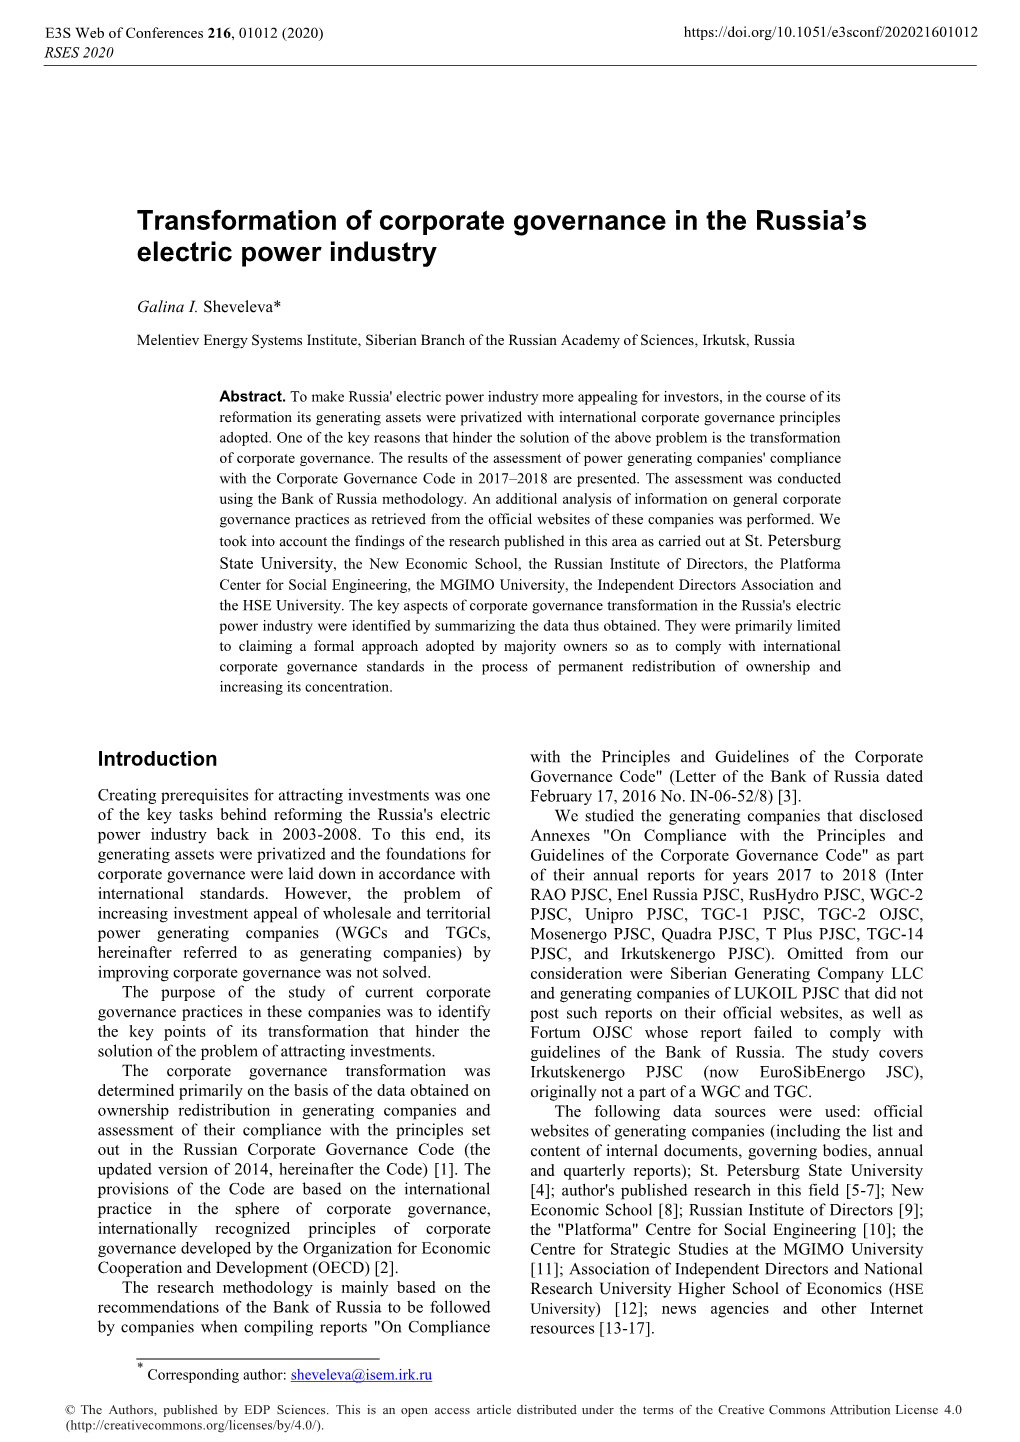 Transformation of Corporate Governance in the Russia's Electric